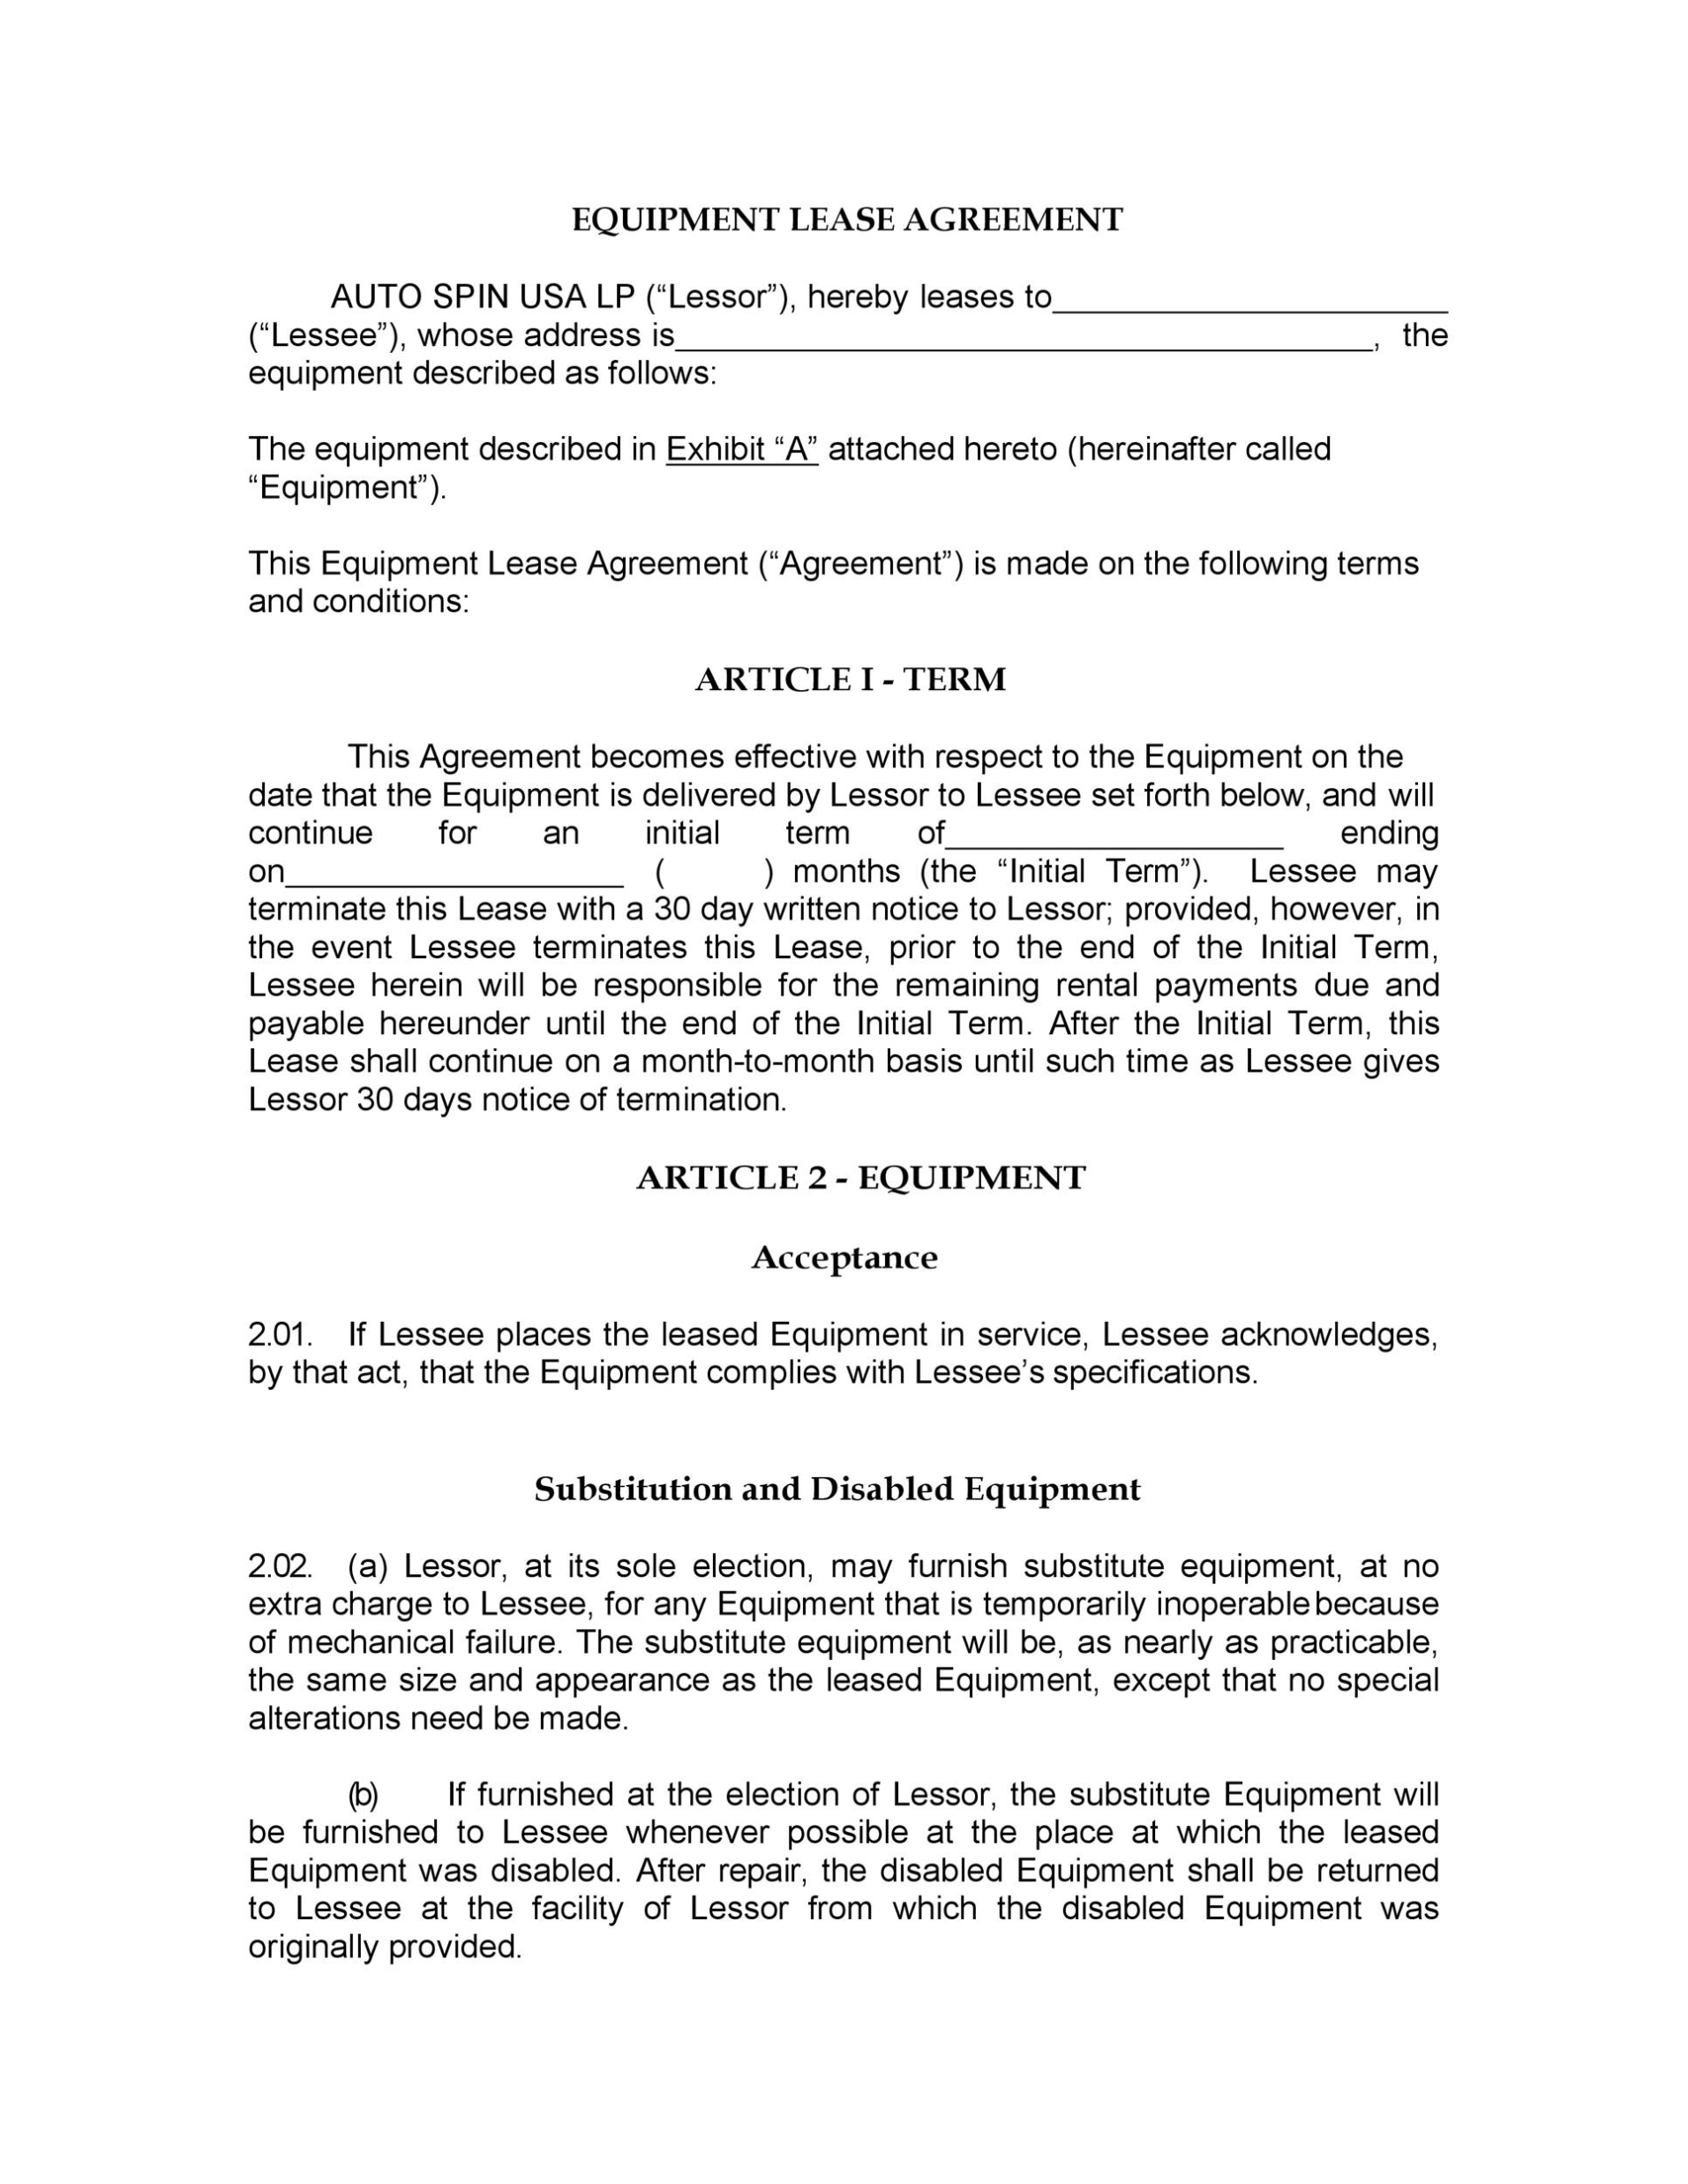 44 Simple Equipment Lease Agreement Templates ᐅ Templatelab For Tool Rental Agreement Template